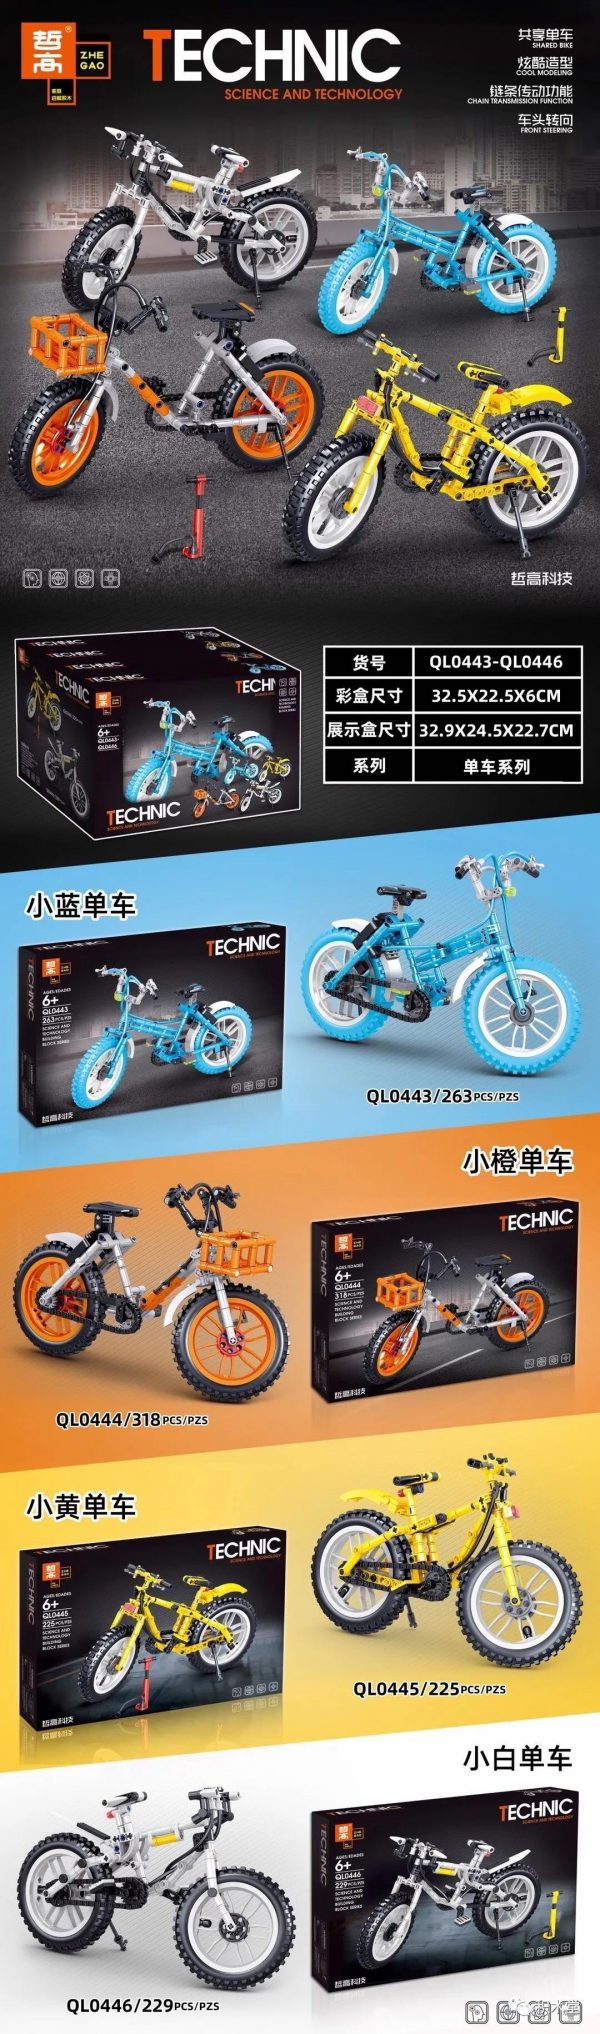 ZHEGAO QL0443 Shared bicycles 4 types of small blue bicycles, small orange bicycles, small yellow bicycles, and small white bicycles 0